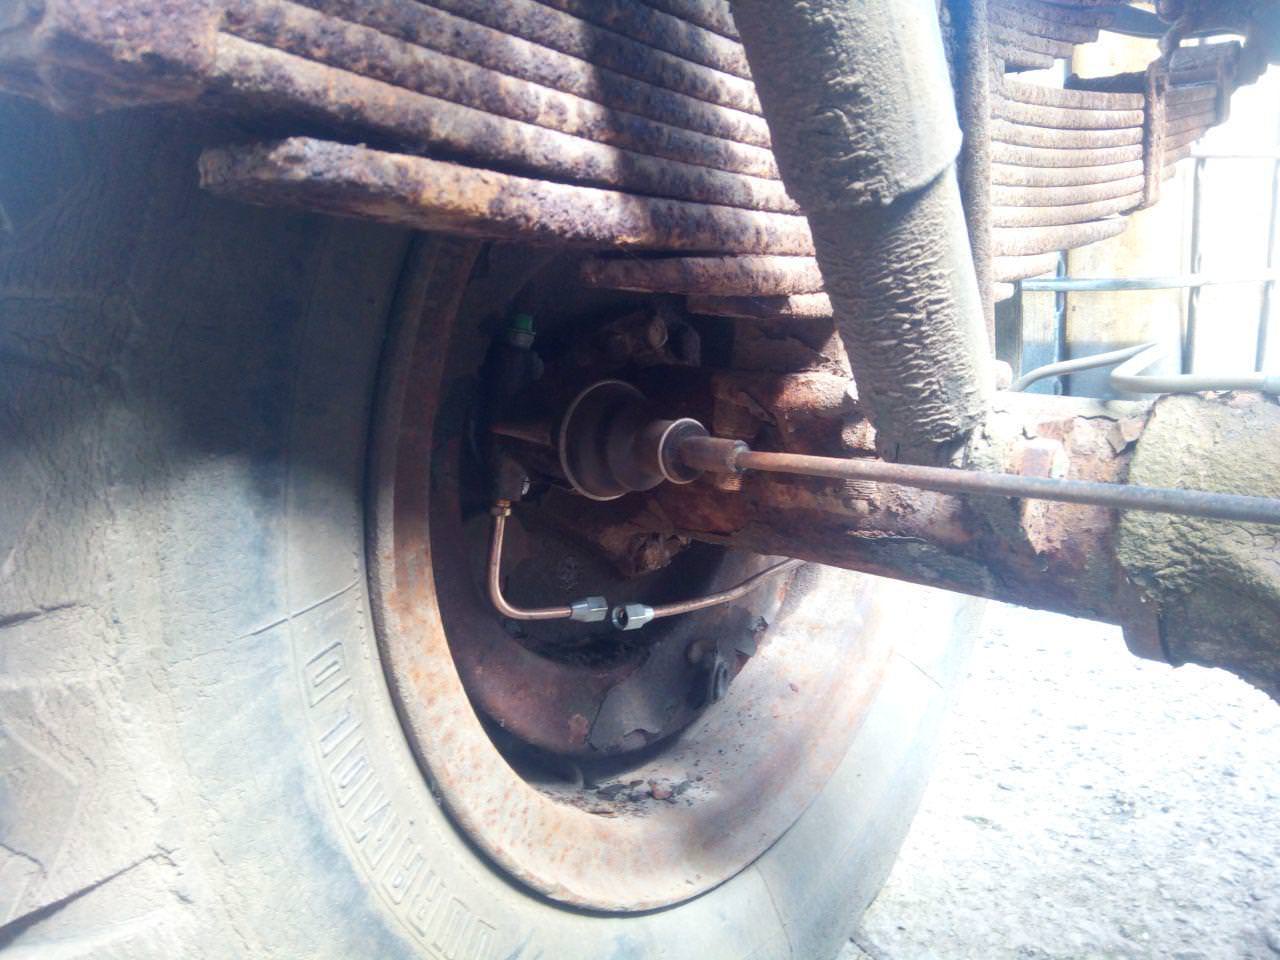 The end of the back axle brake pipe for the offside of the axle,
with two union nuts just beneath the axle, because I screwed the pipe
up and ended up trying to splice it.